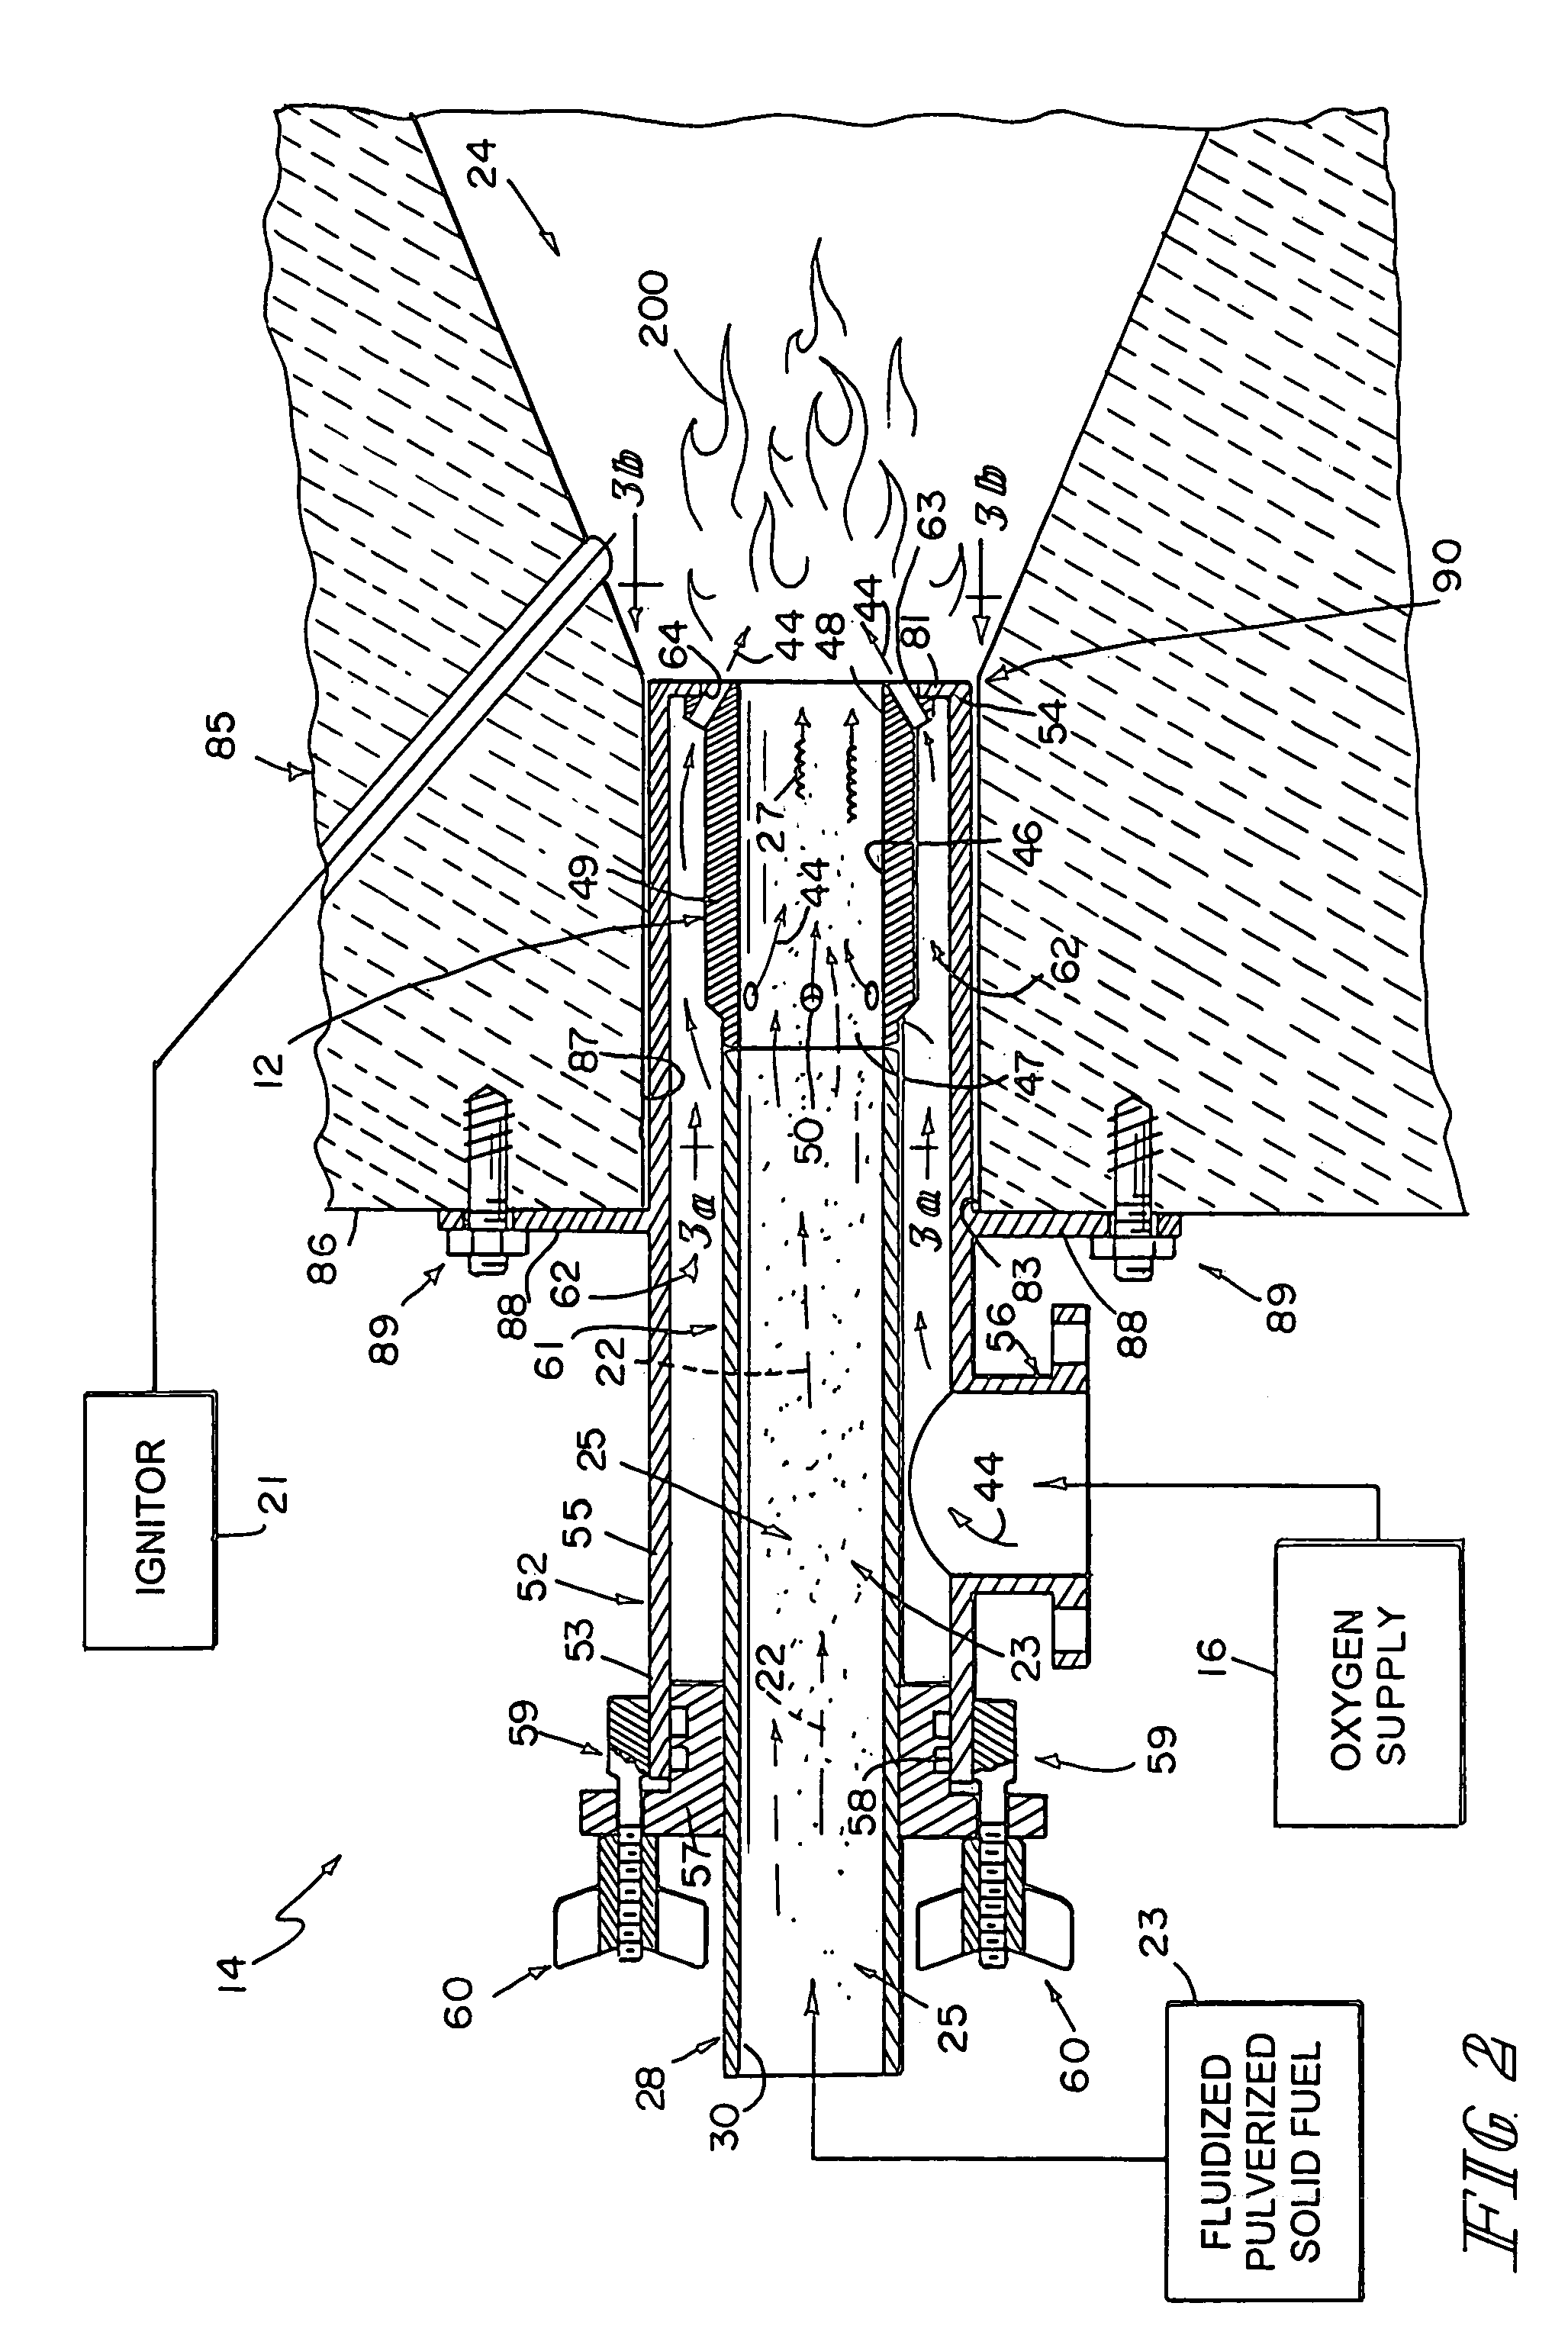 Apparatus for burning pulverized solid fuels with oxygen